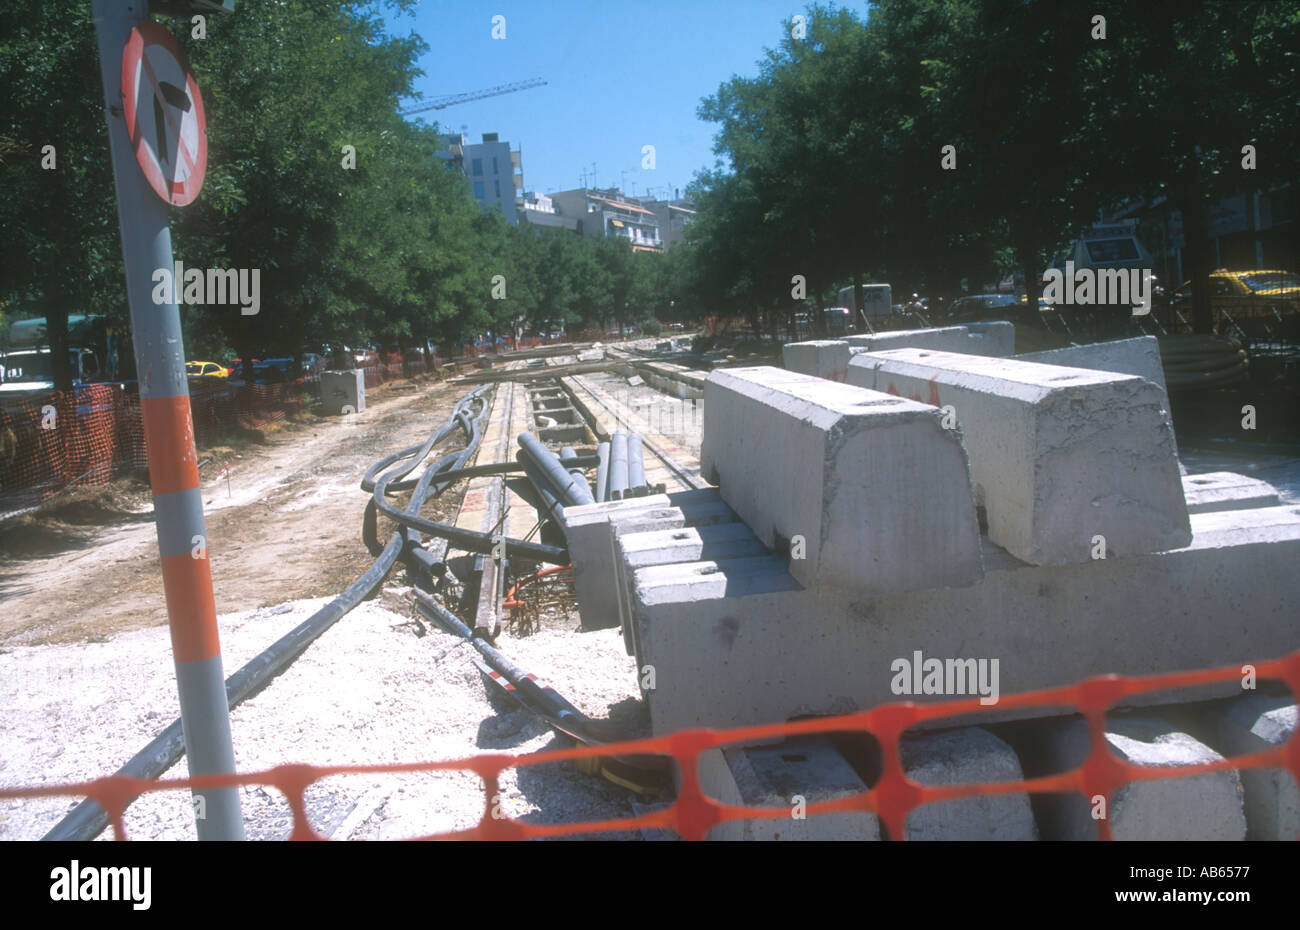 Tramway from the city centre to the coast under construction, in Kalirois Street, Athens, Greece. Stock Photo